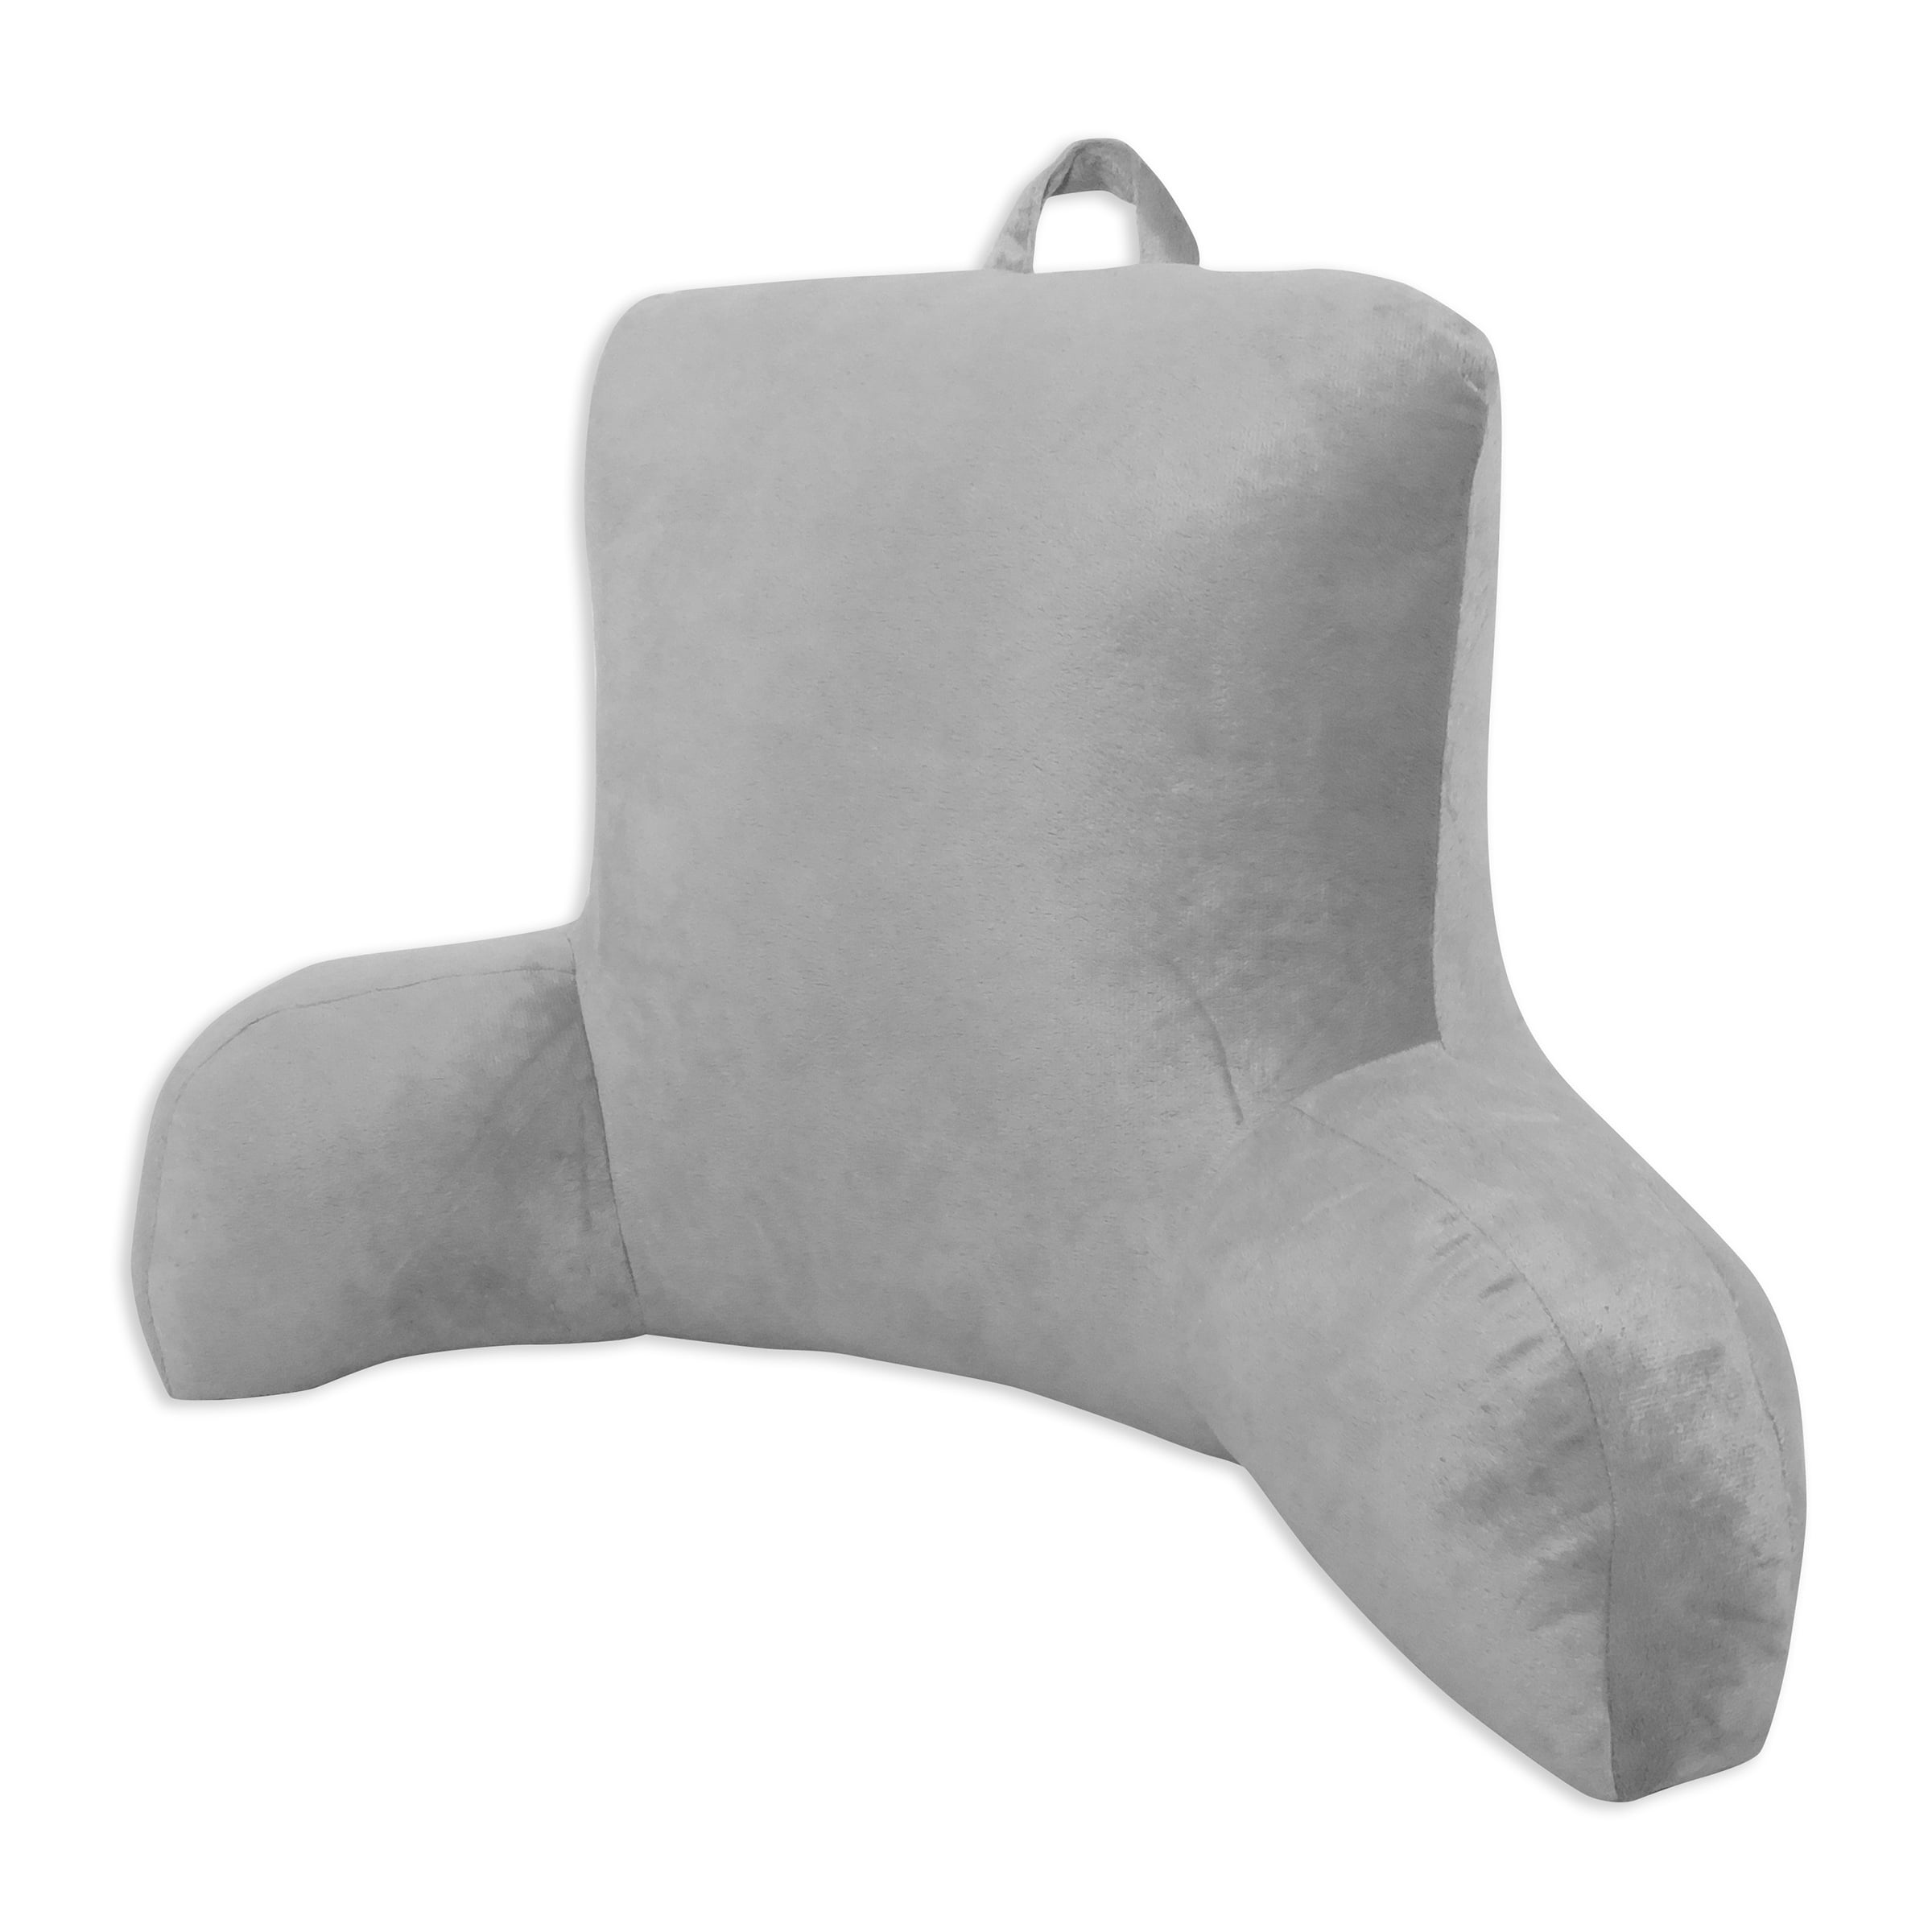 Plush Micro Mink Bed Rest Lounger Pillow Backrest Support arm w/ Pocket 